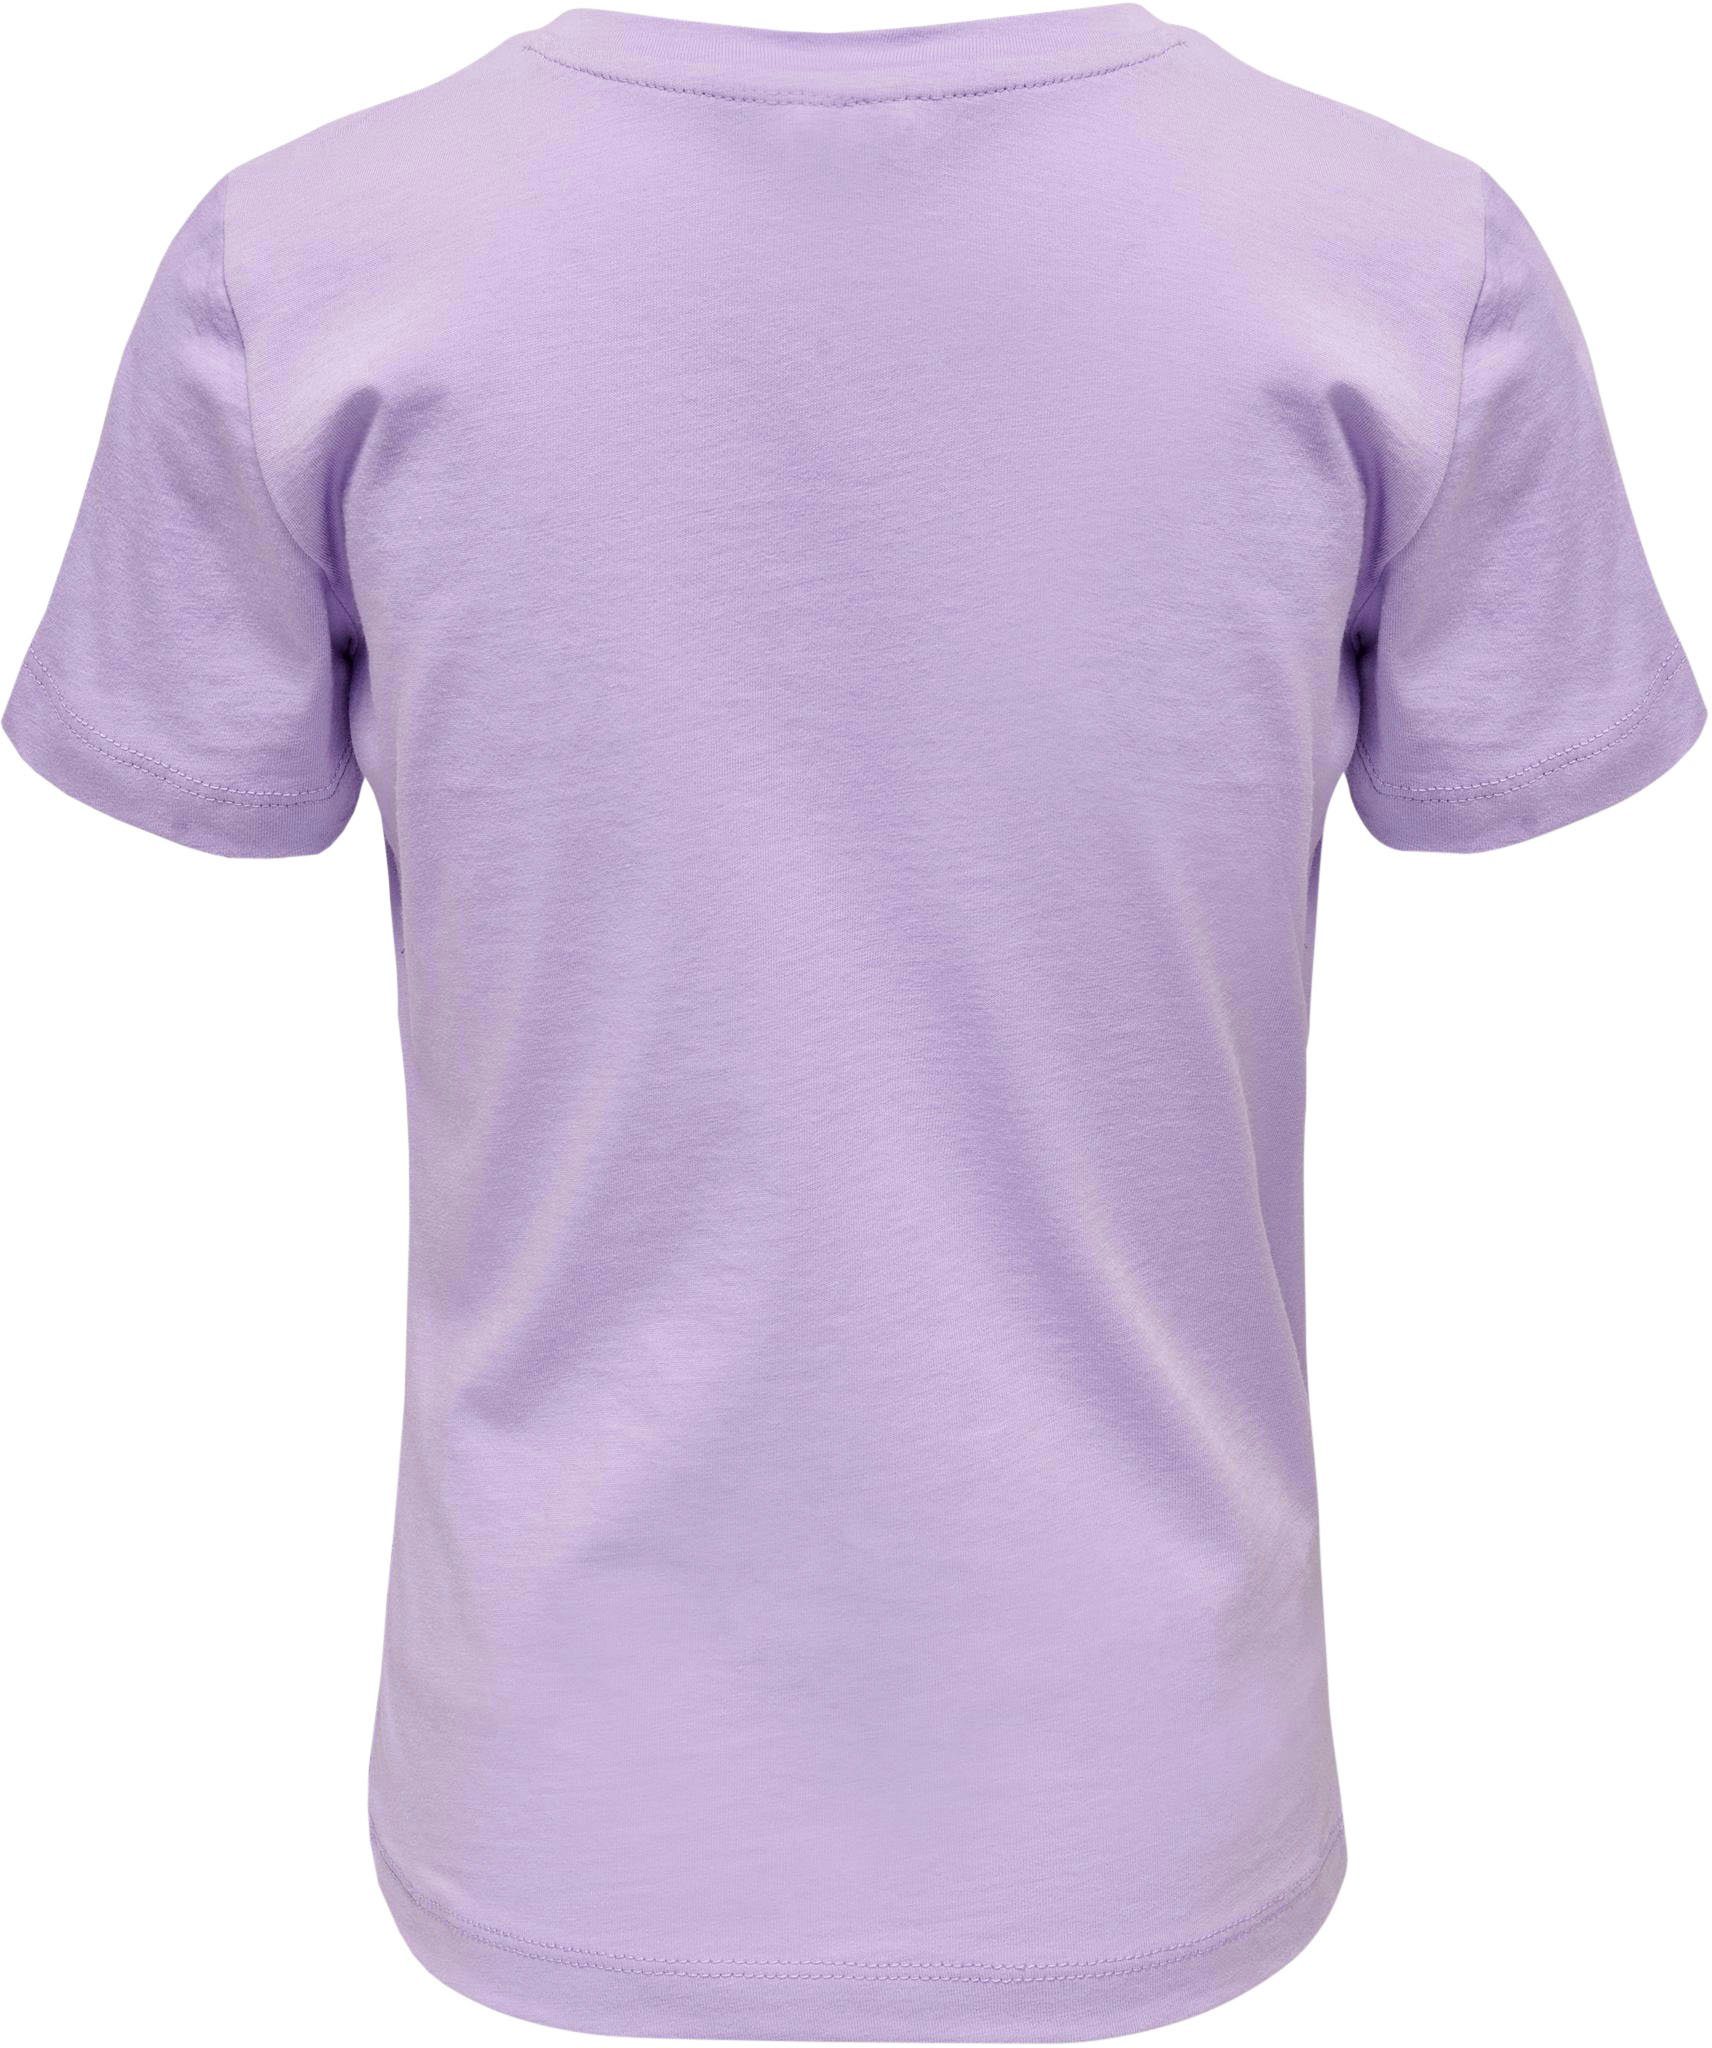 S/S KIDS ONLY ONLY JRS Rose TEE KOGNEW Purple Kurzarmshirt